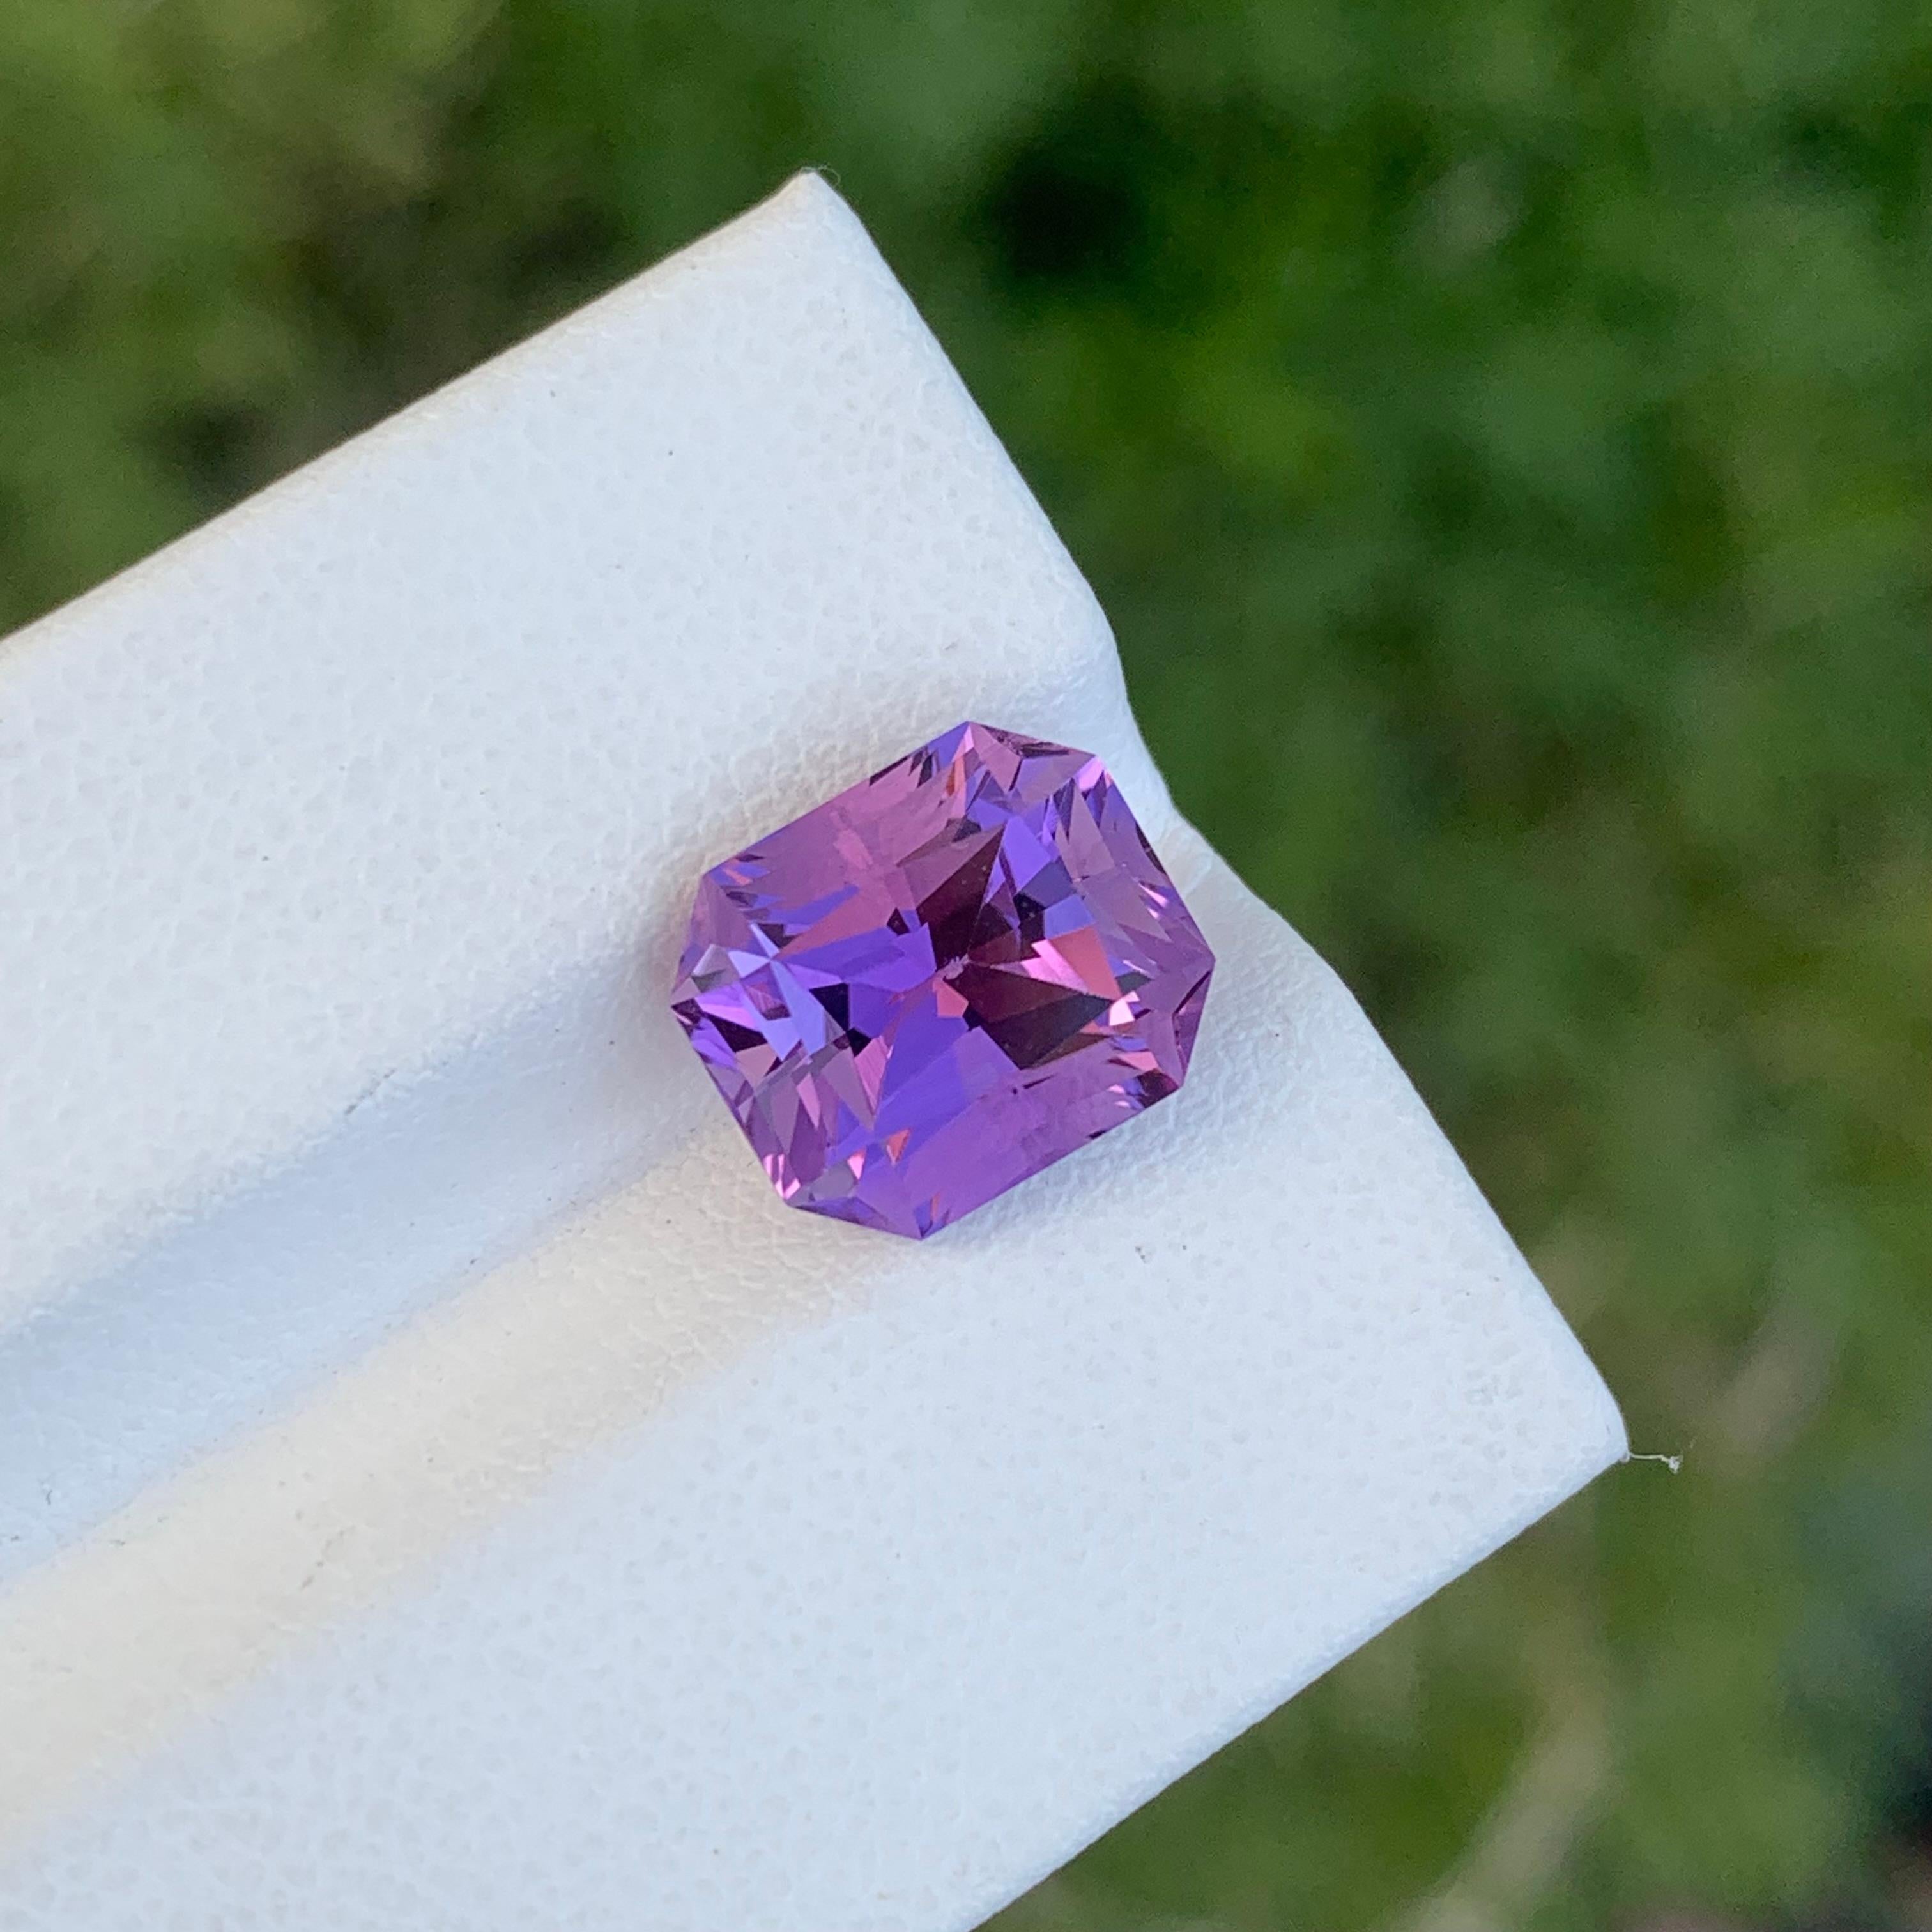 Loose Amethyst
Weight: 4.60 Carats
Dimension: 10.6 x 9.1 x 7.6 Mm
Colour: Purple
Origin: Brazil
Treatment: Non
Certificate: On Demand
Shape: Octagon 

Amethyst, a stunning variety of quartz known for its mesmerizing purple hue, has captivated humans